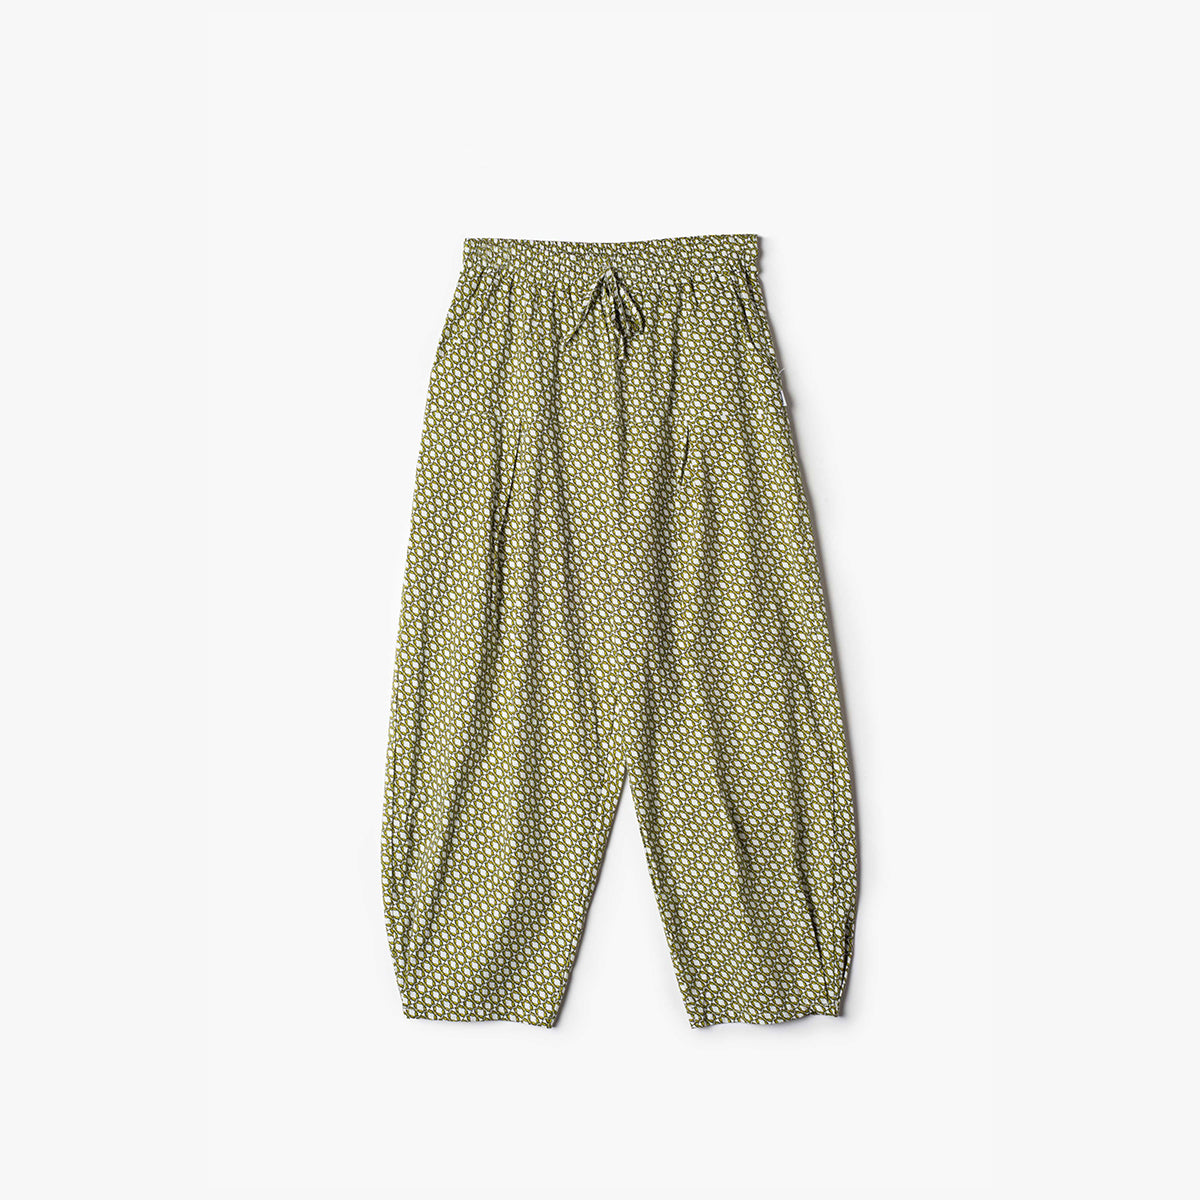 Micro-pattern baggy trousers